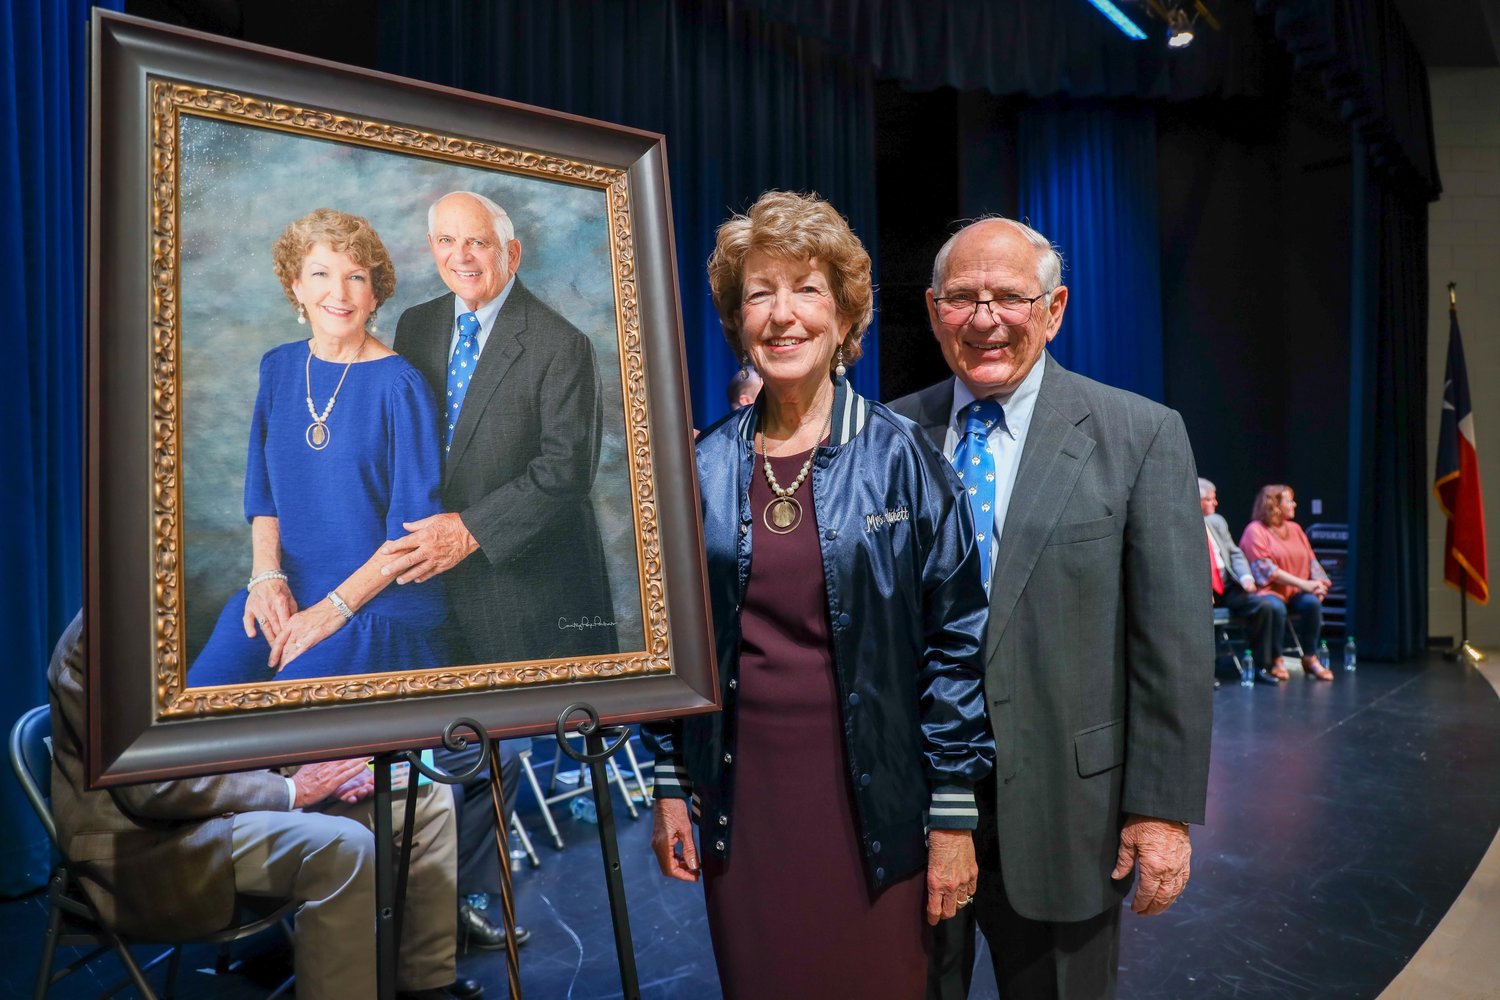 Bill and Cindy Haskett pose with their official portrait to be displayed at the junior high school named in their honor.